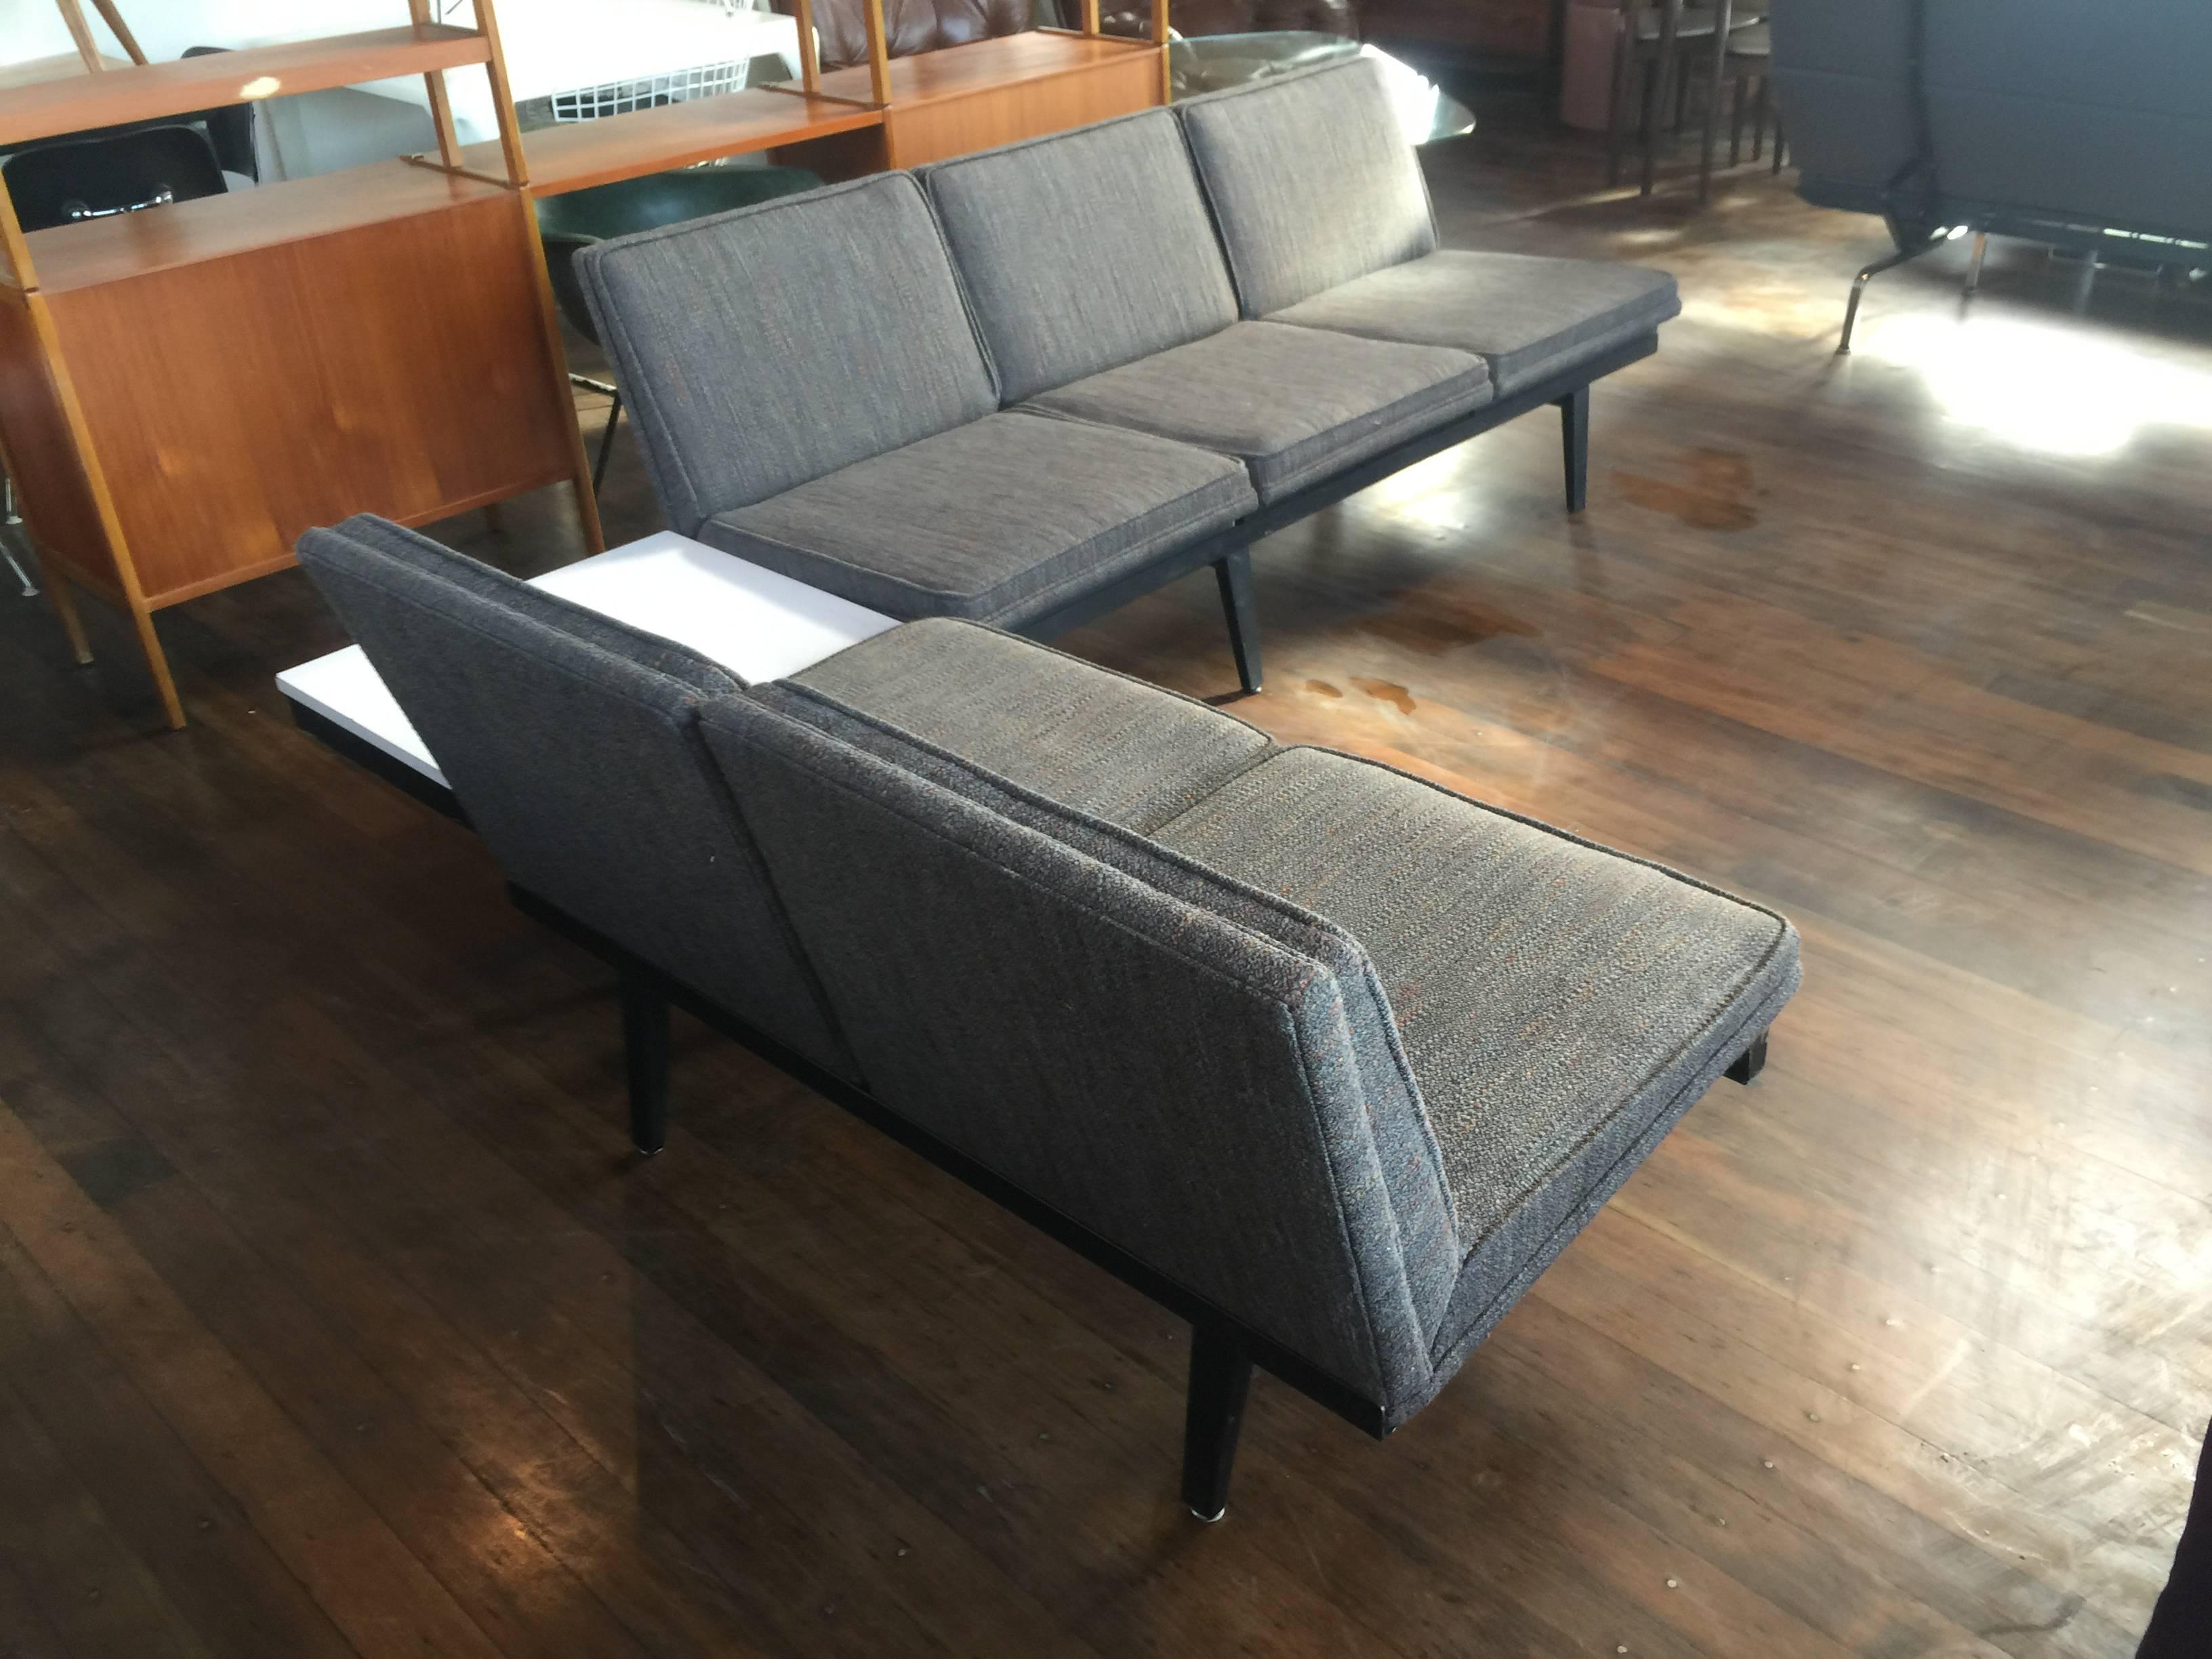 This is a gorgeous sectional that has just been reupholstered in Knoll Rivington textile.
This set includes, 
One steel frame which is 8ft long,
one steel frame which is 4ft long.
There are five seats and 
one laminate top table.
This can be